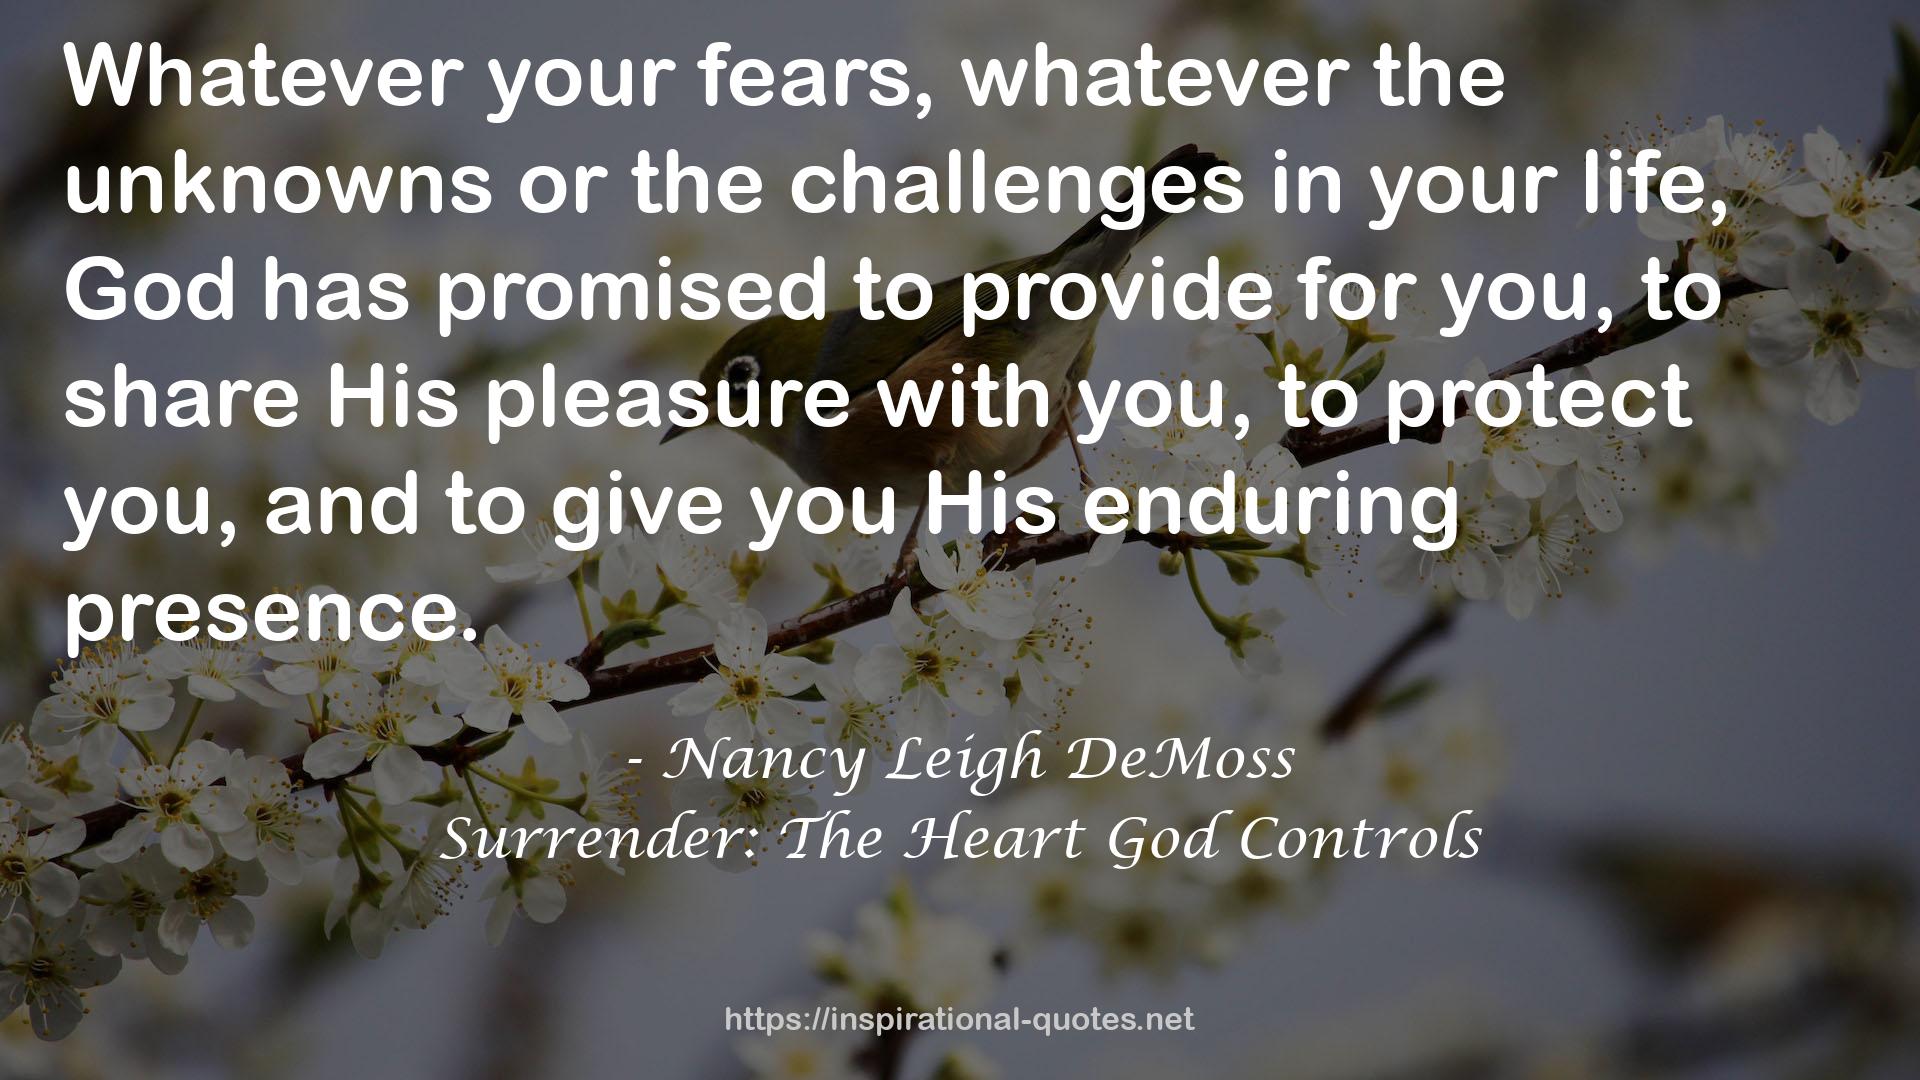 Surrender: The Heart God Controls QUOTES